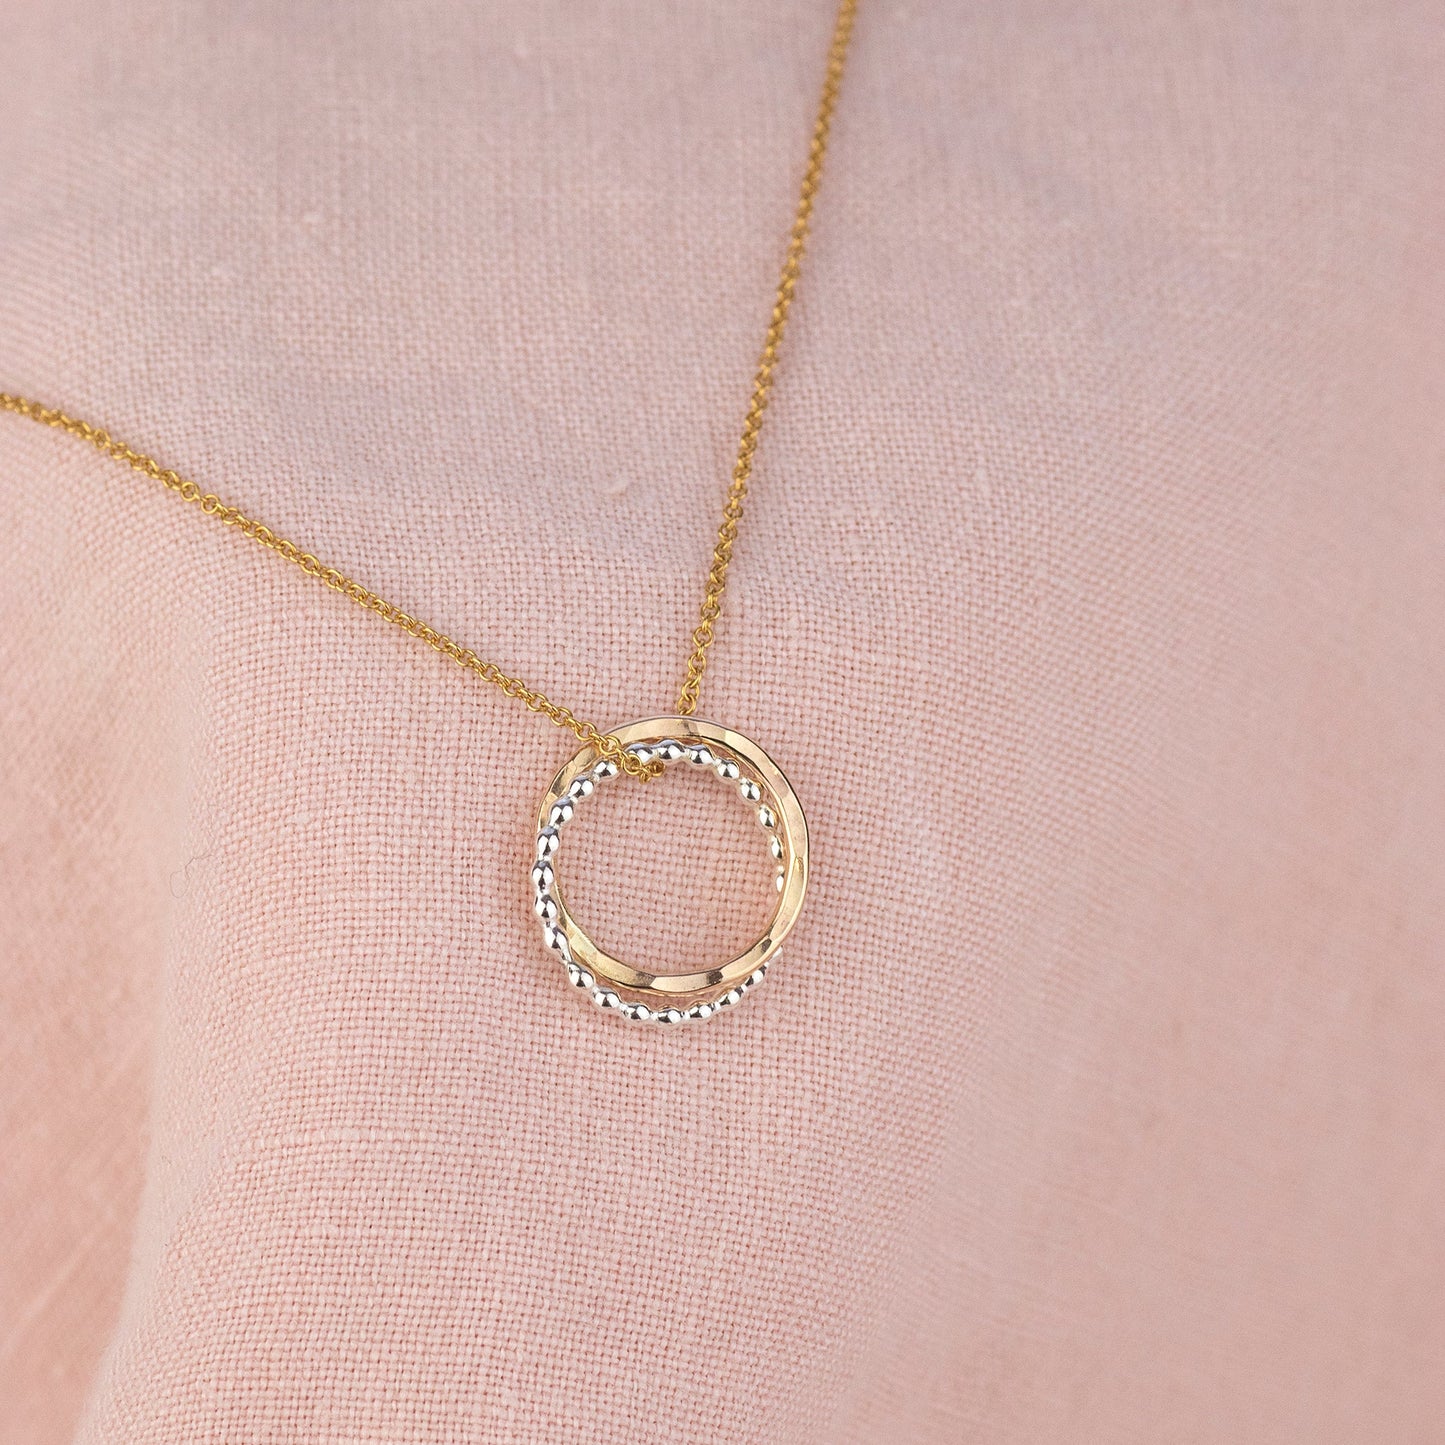 Bride & Bridesmaid Necklace - Linked for a Lifetime - Silver & Gold